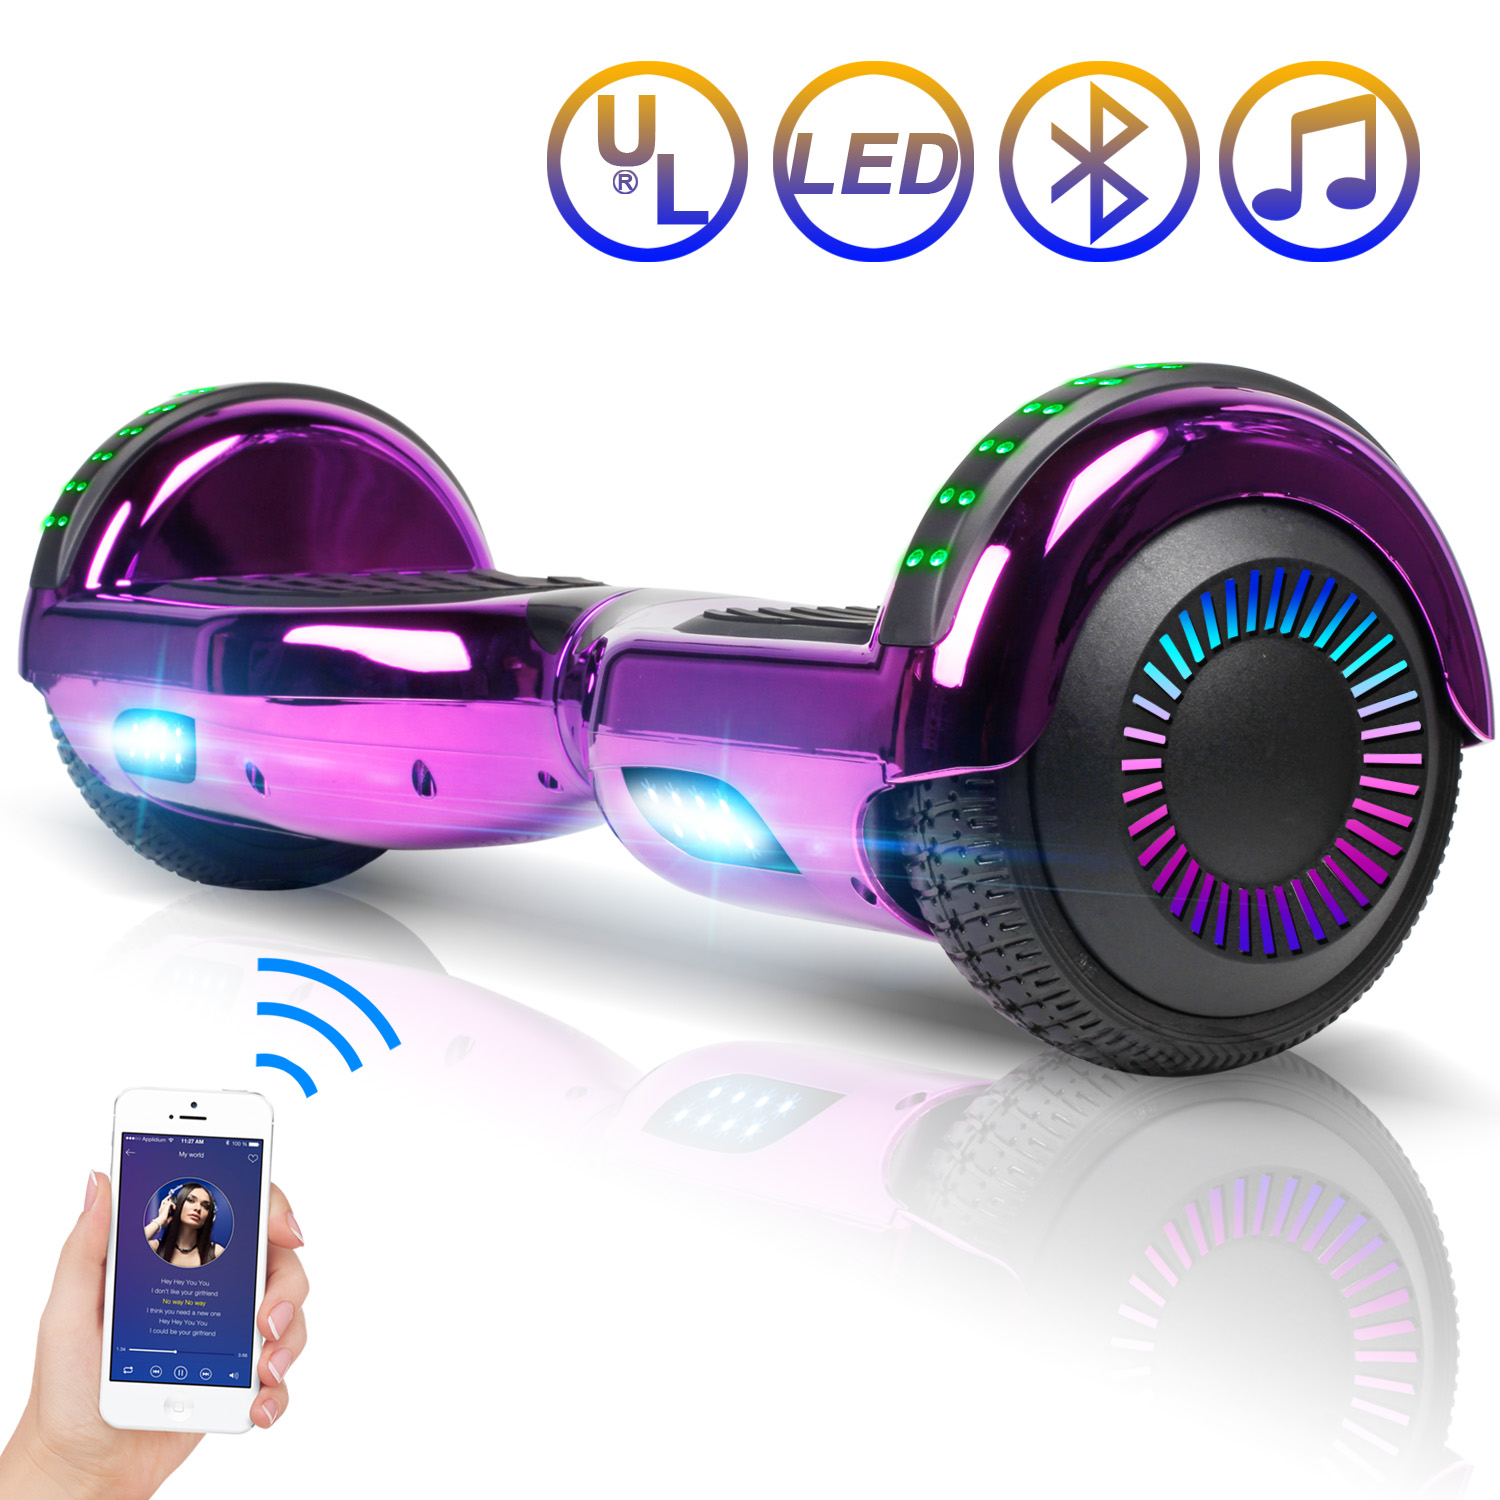 6.5/" LED Hoverboard Electric Self Balancing Bluetooth Scooter No Bag Purple